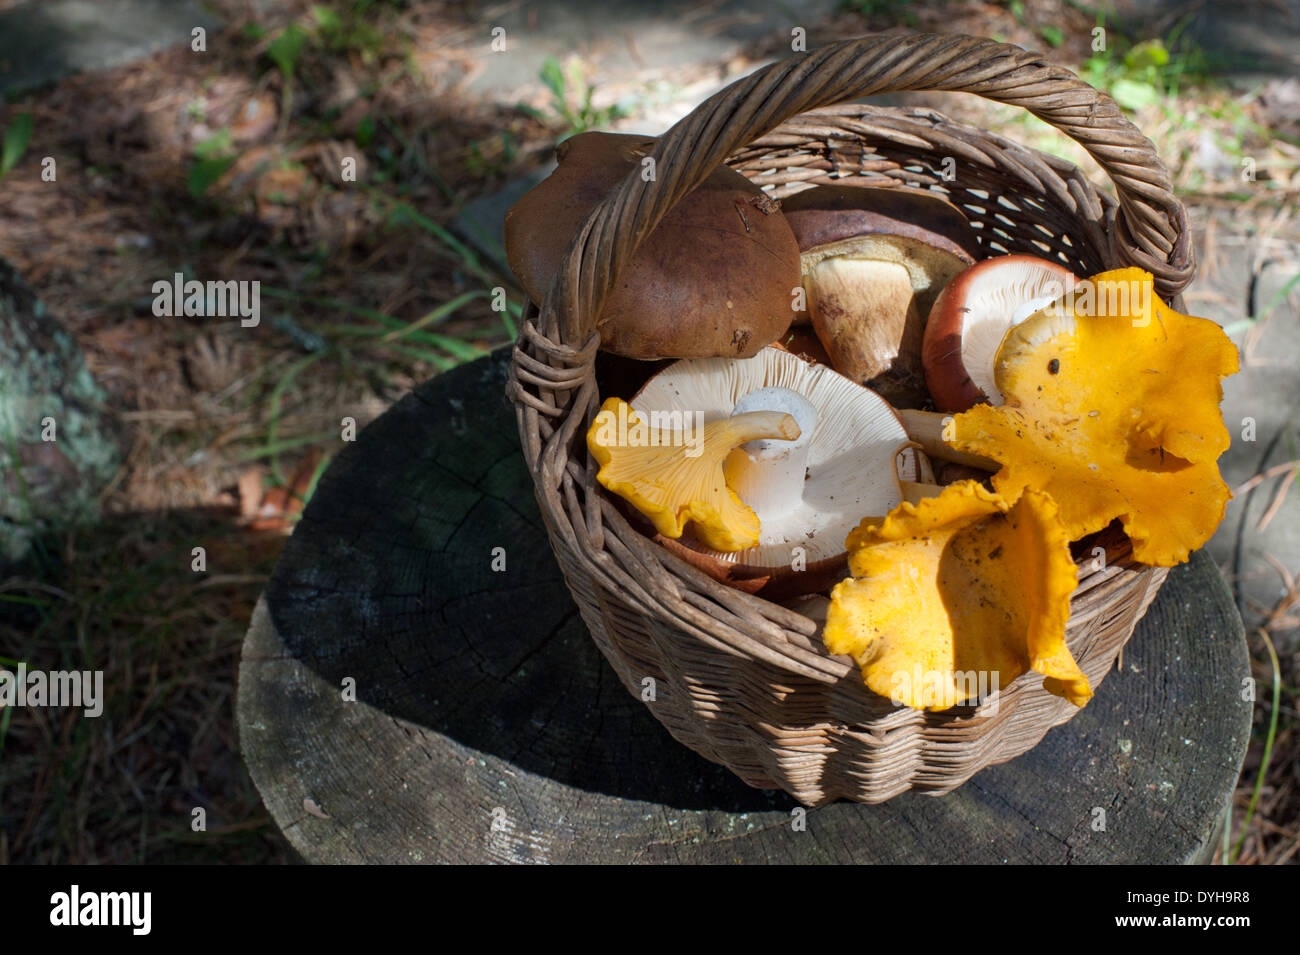 A selection of freshly picked forest mushrooms in a wicker basket. Stock Photo